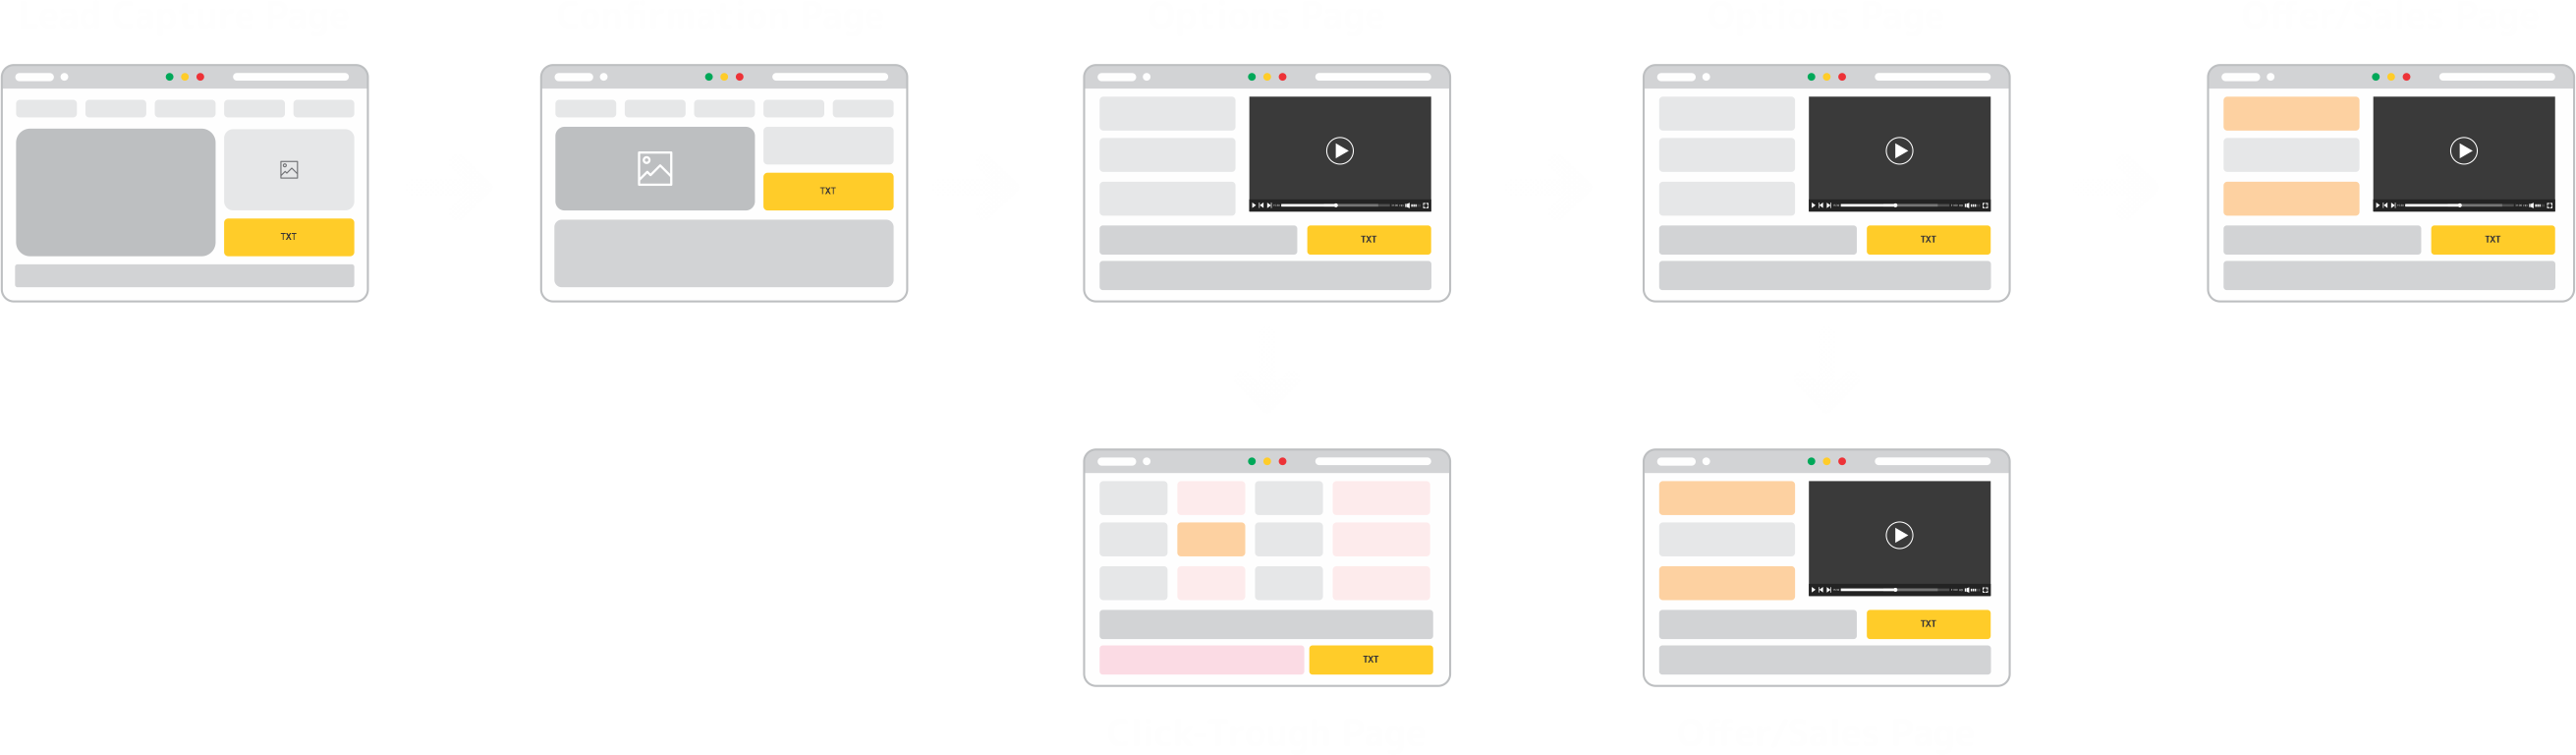 Click tracker - Landing Page Sequence